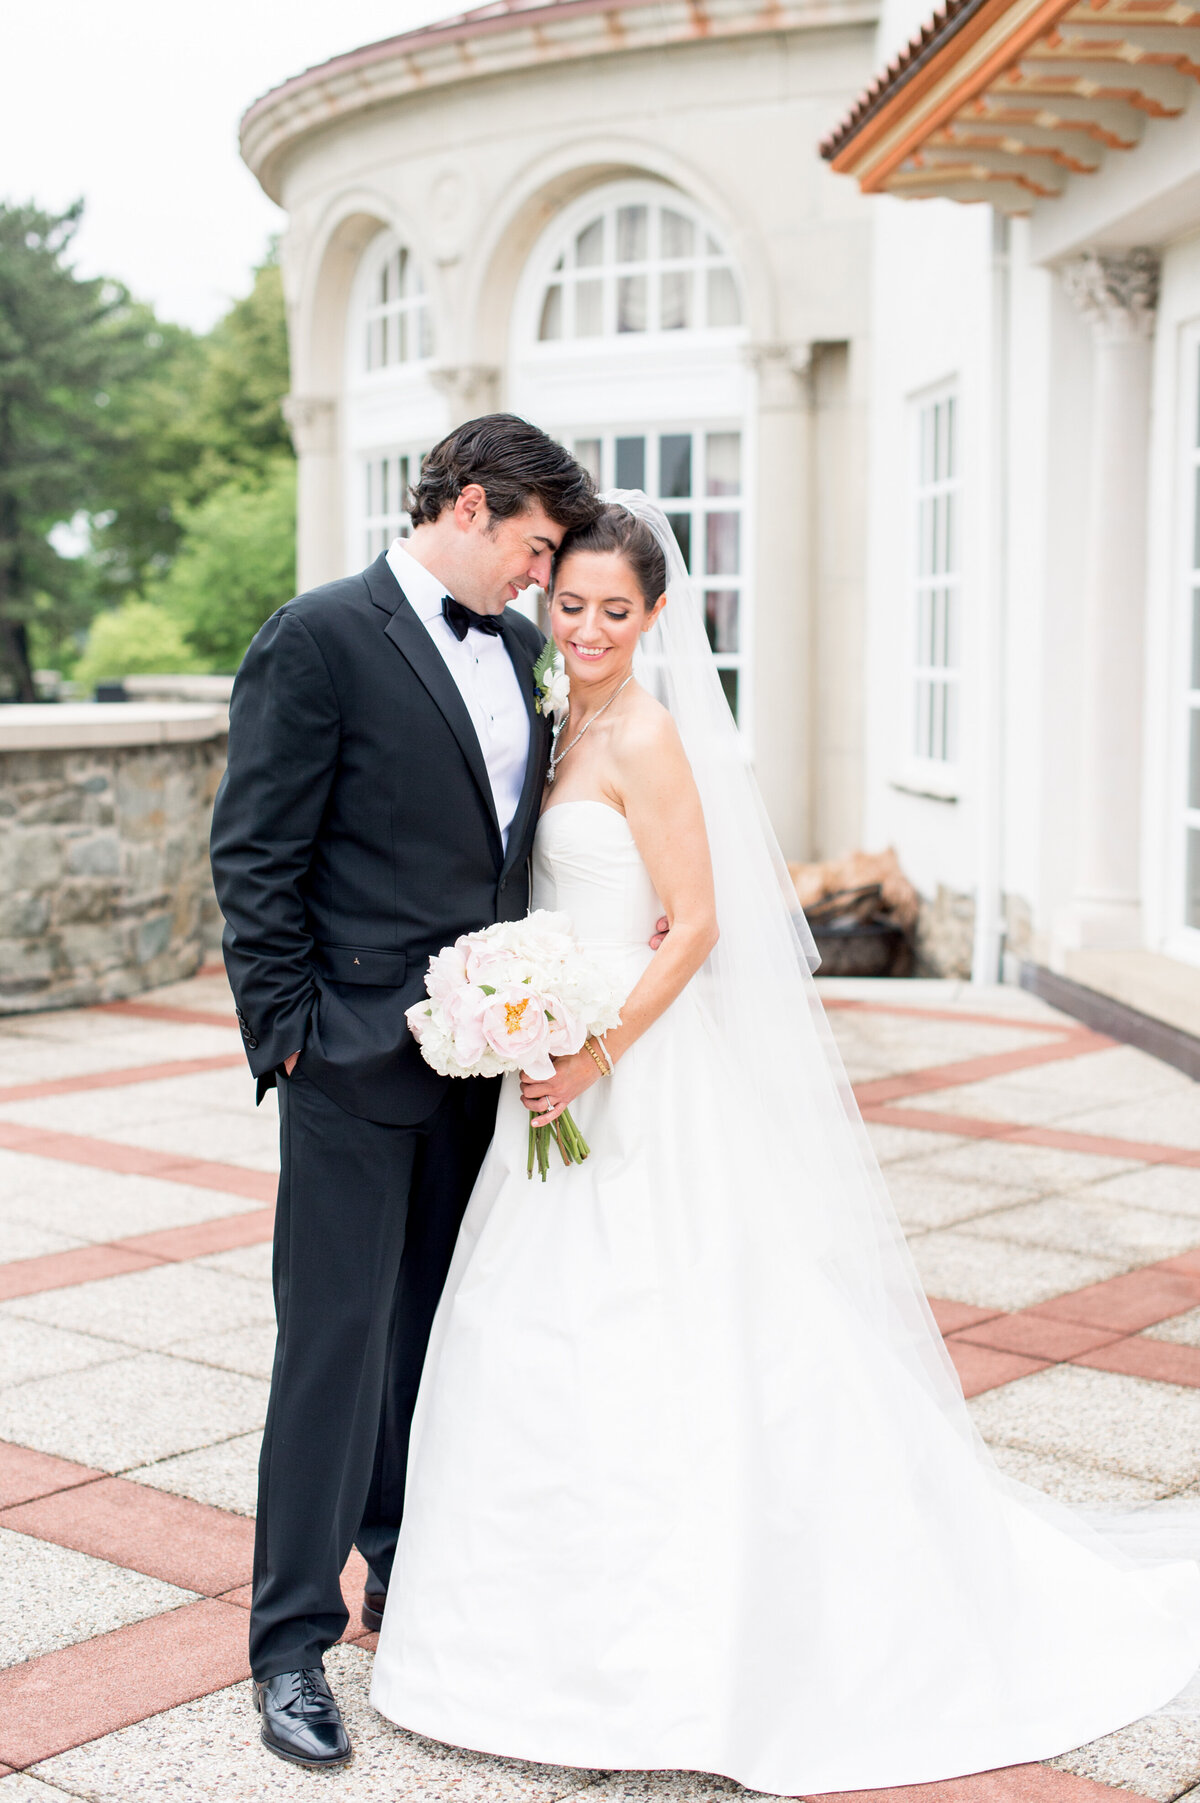 Bride and groom at Congressional Country Club wedding day for iconic Washington DC wedding celebration